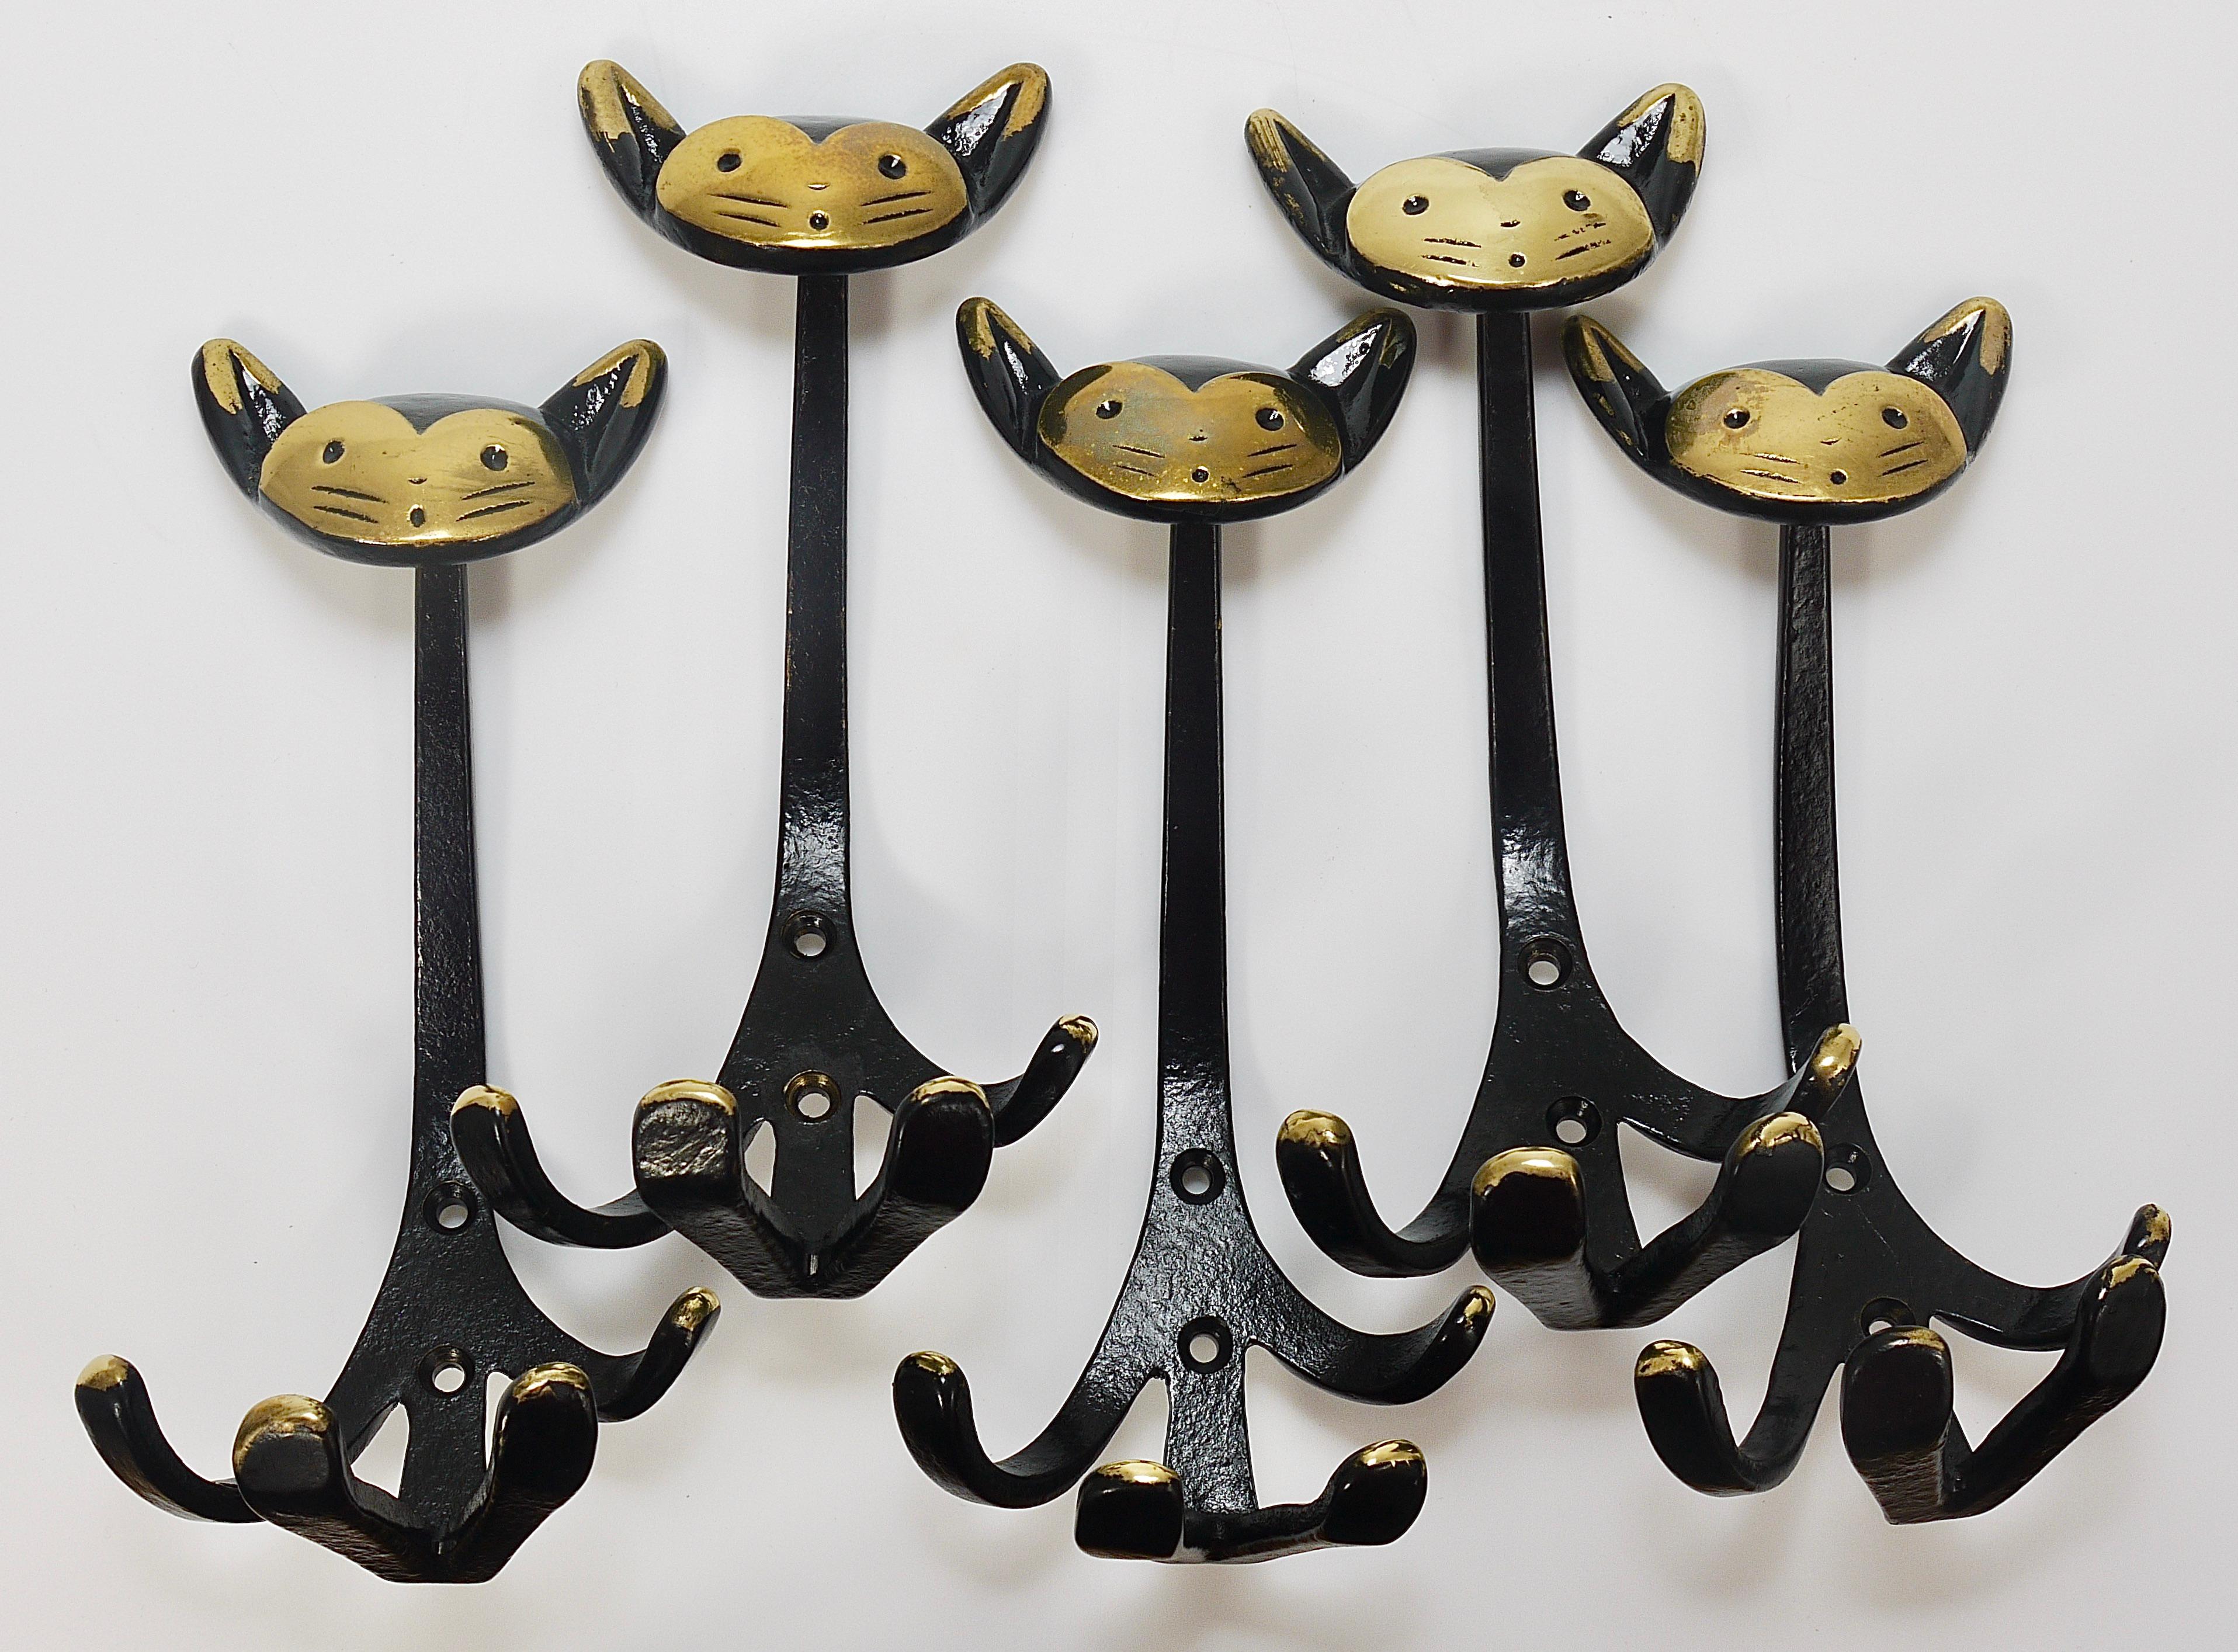 Up to five lovely Austrian modernist animal zoo coat wall hooks, displaying a cat, our favourite hook. The hooks are sold and priced per piece. A humorous design by Walter Bosse, executed by Herta Baller, Vienna / Austria in the 1950s. Made of black